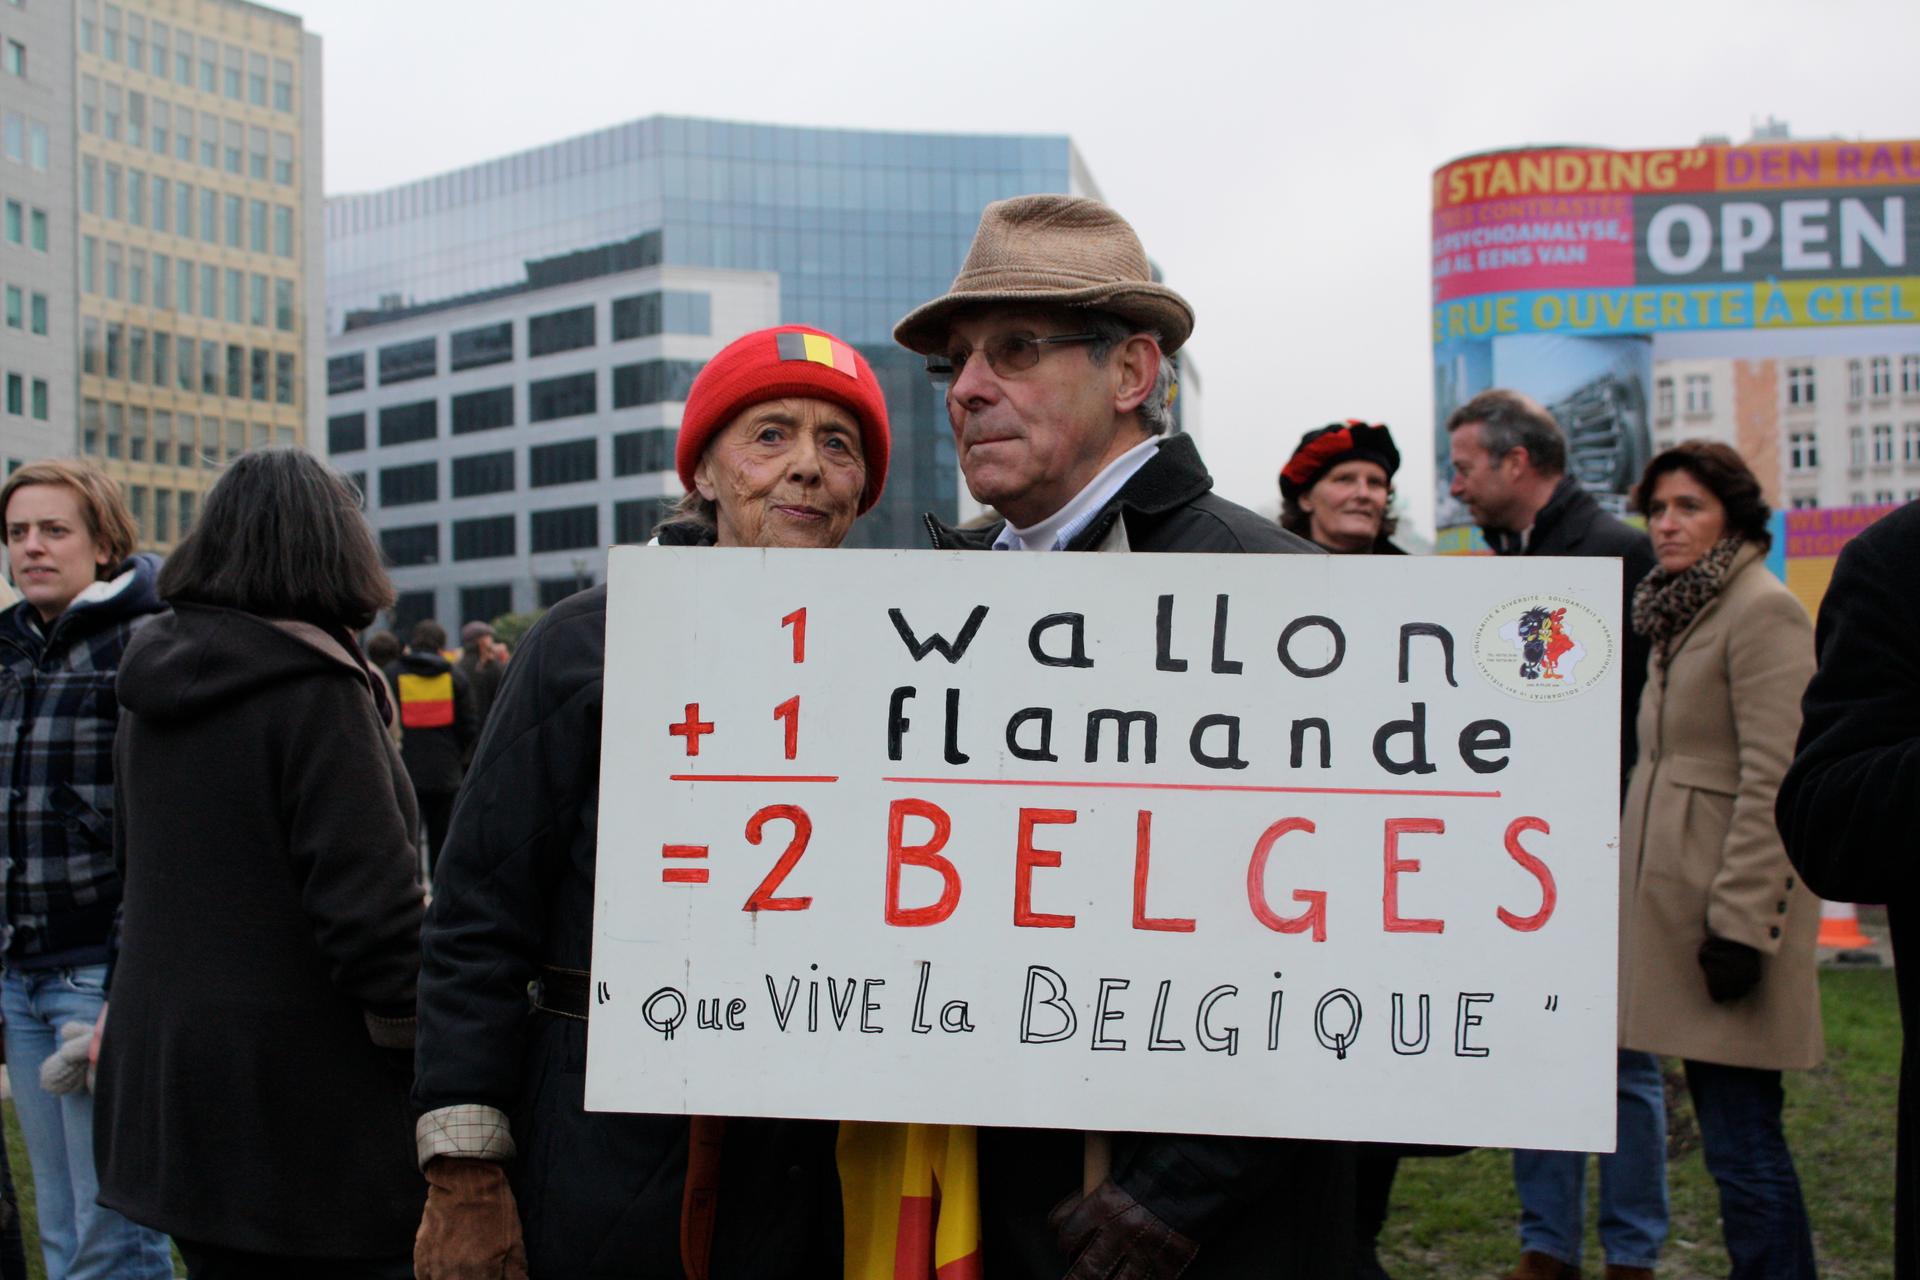 Belgians, Flemish and Walloon Alike, Protest Against Their Country's Lack of a Federal Government